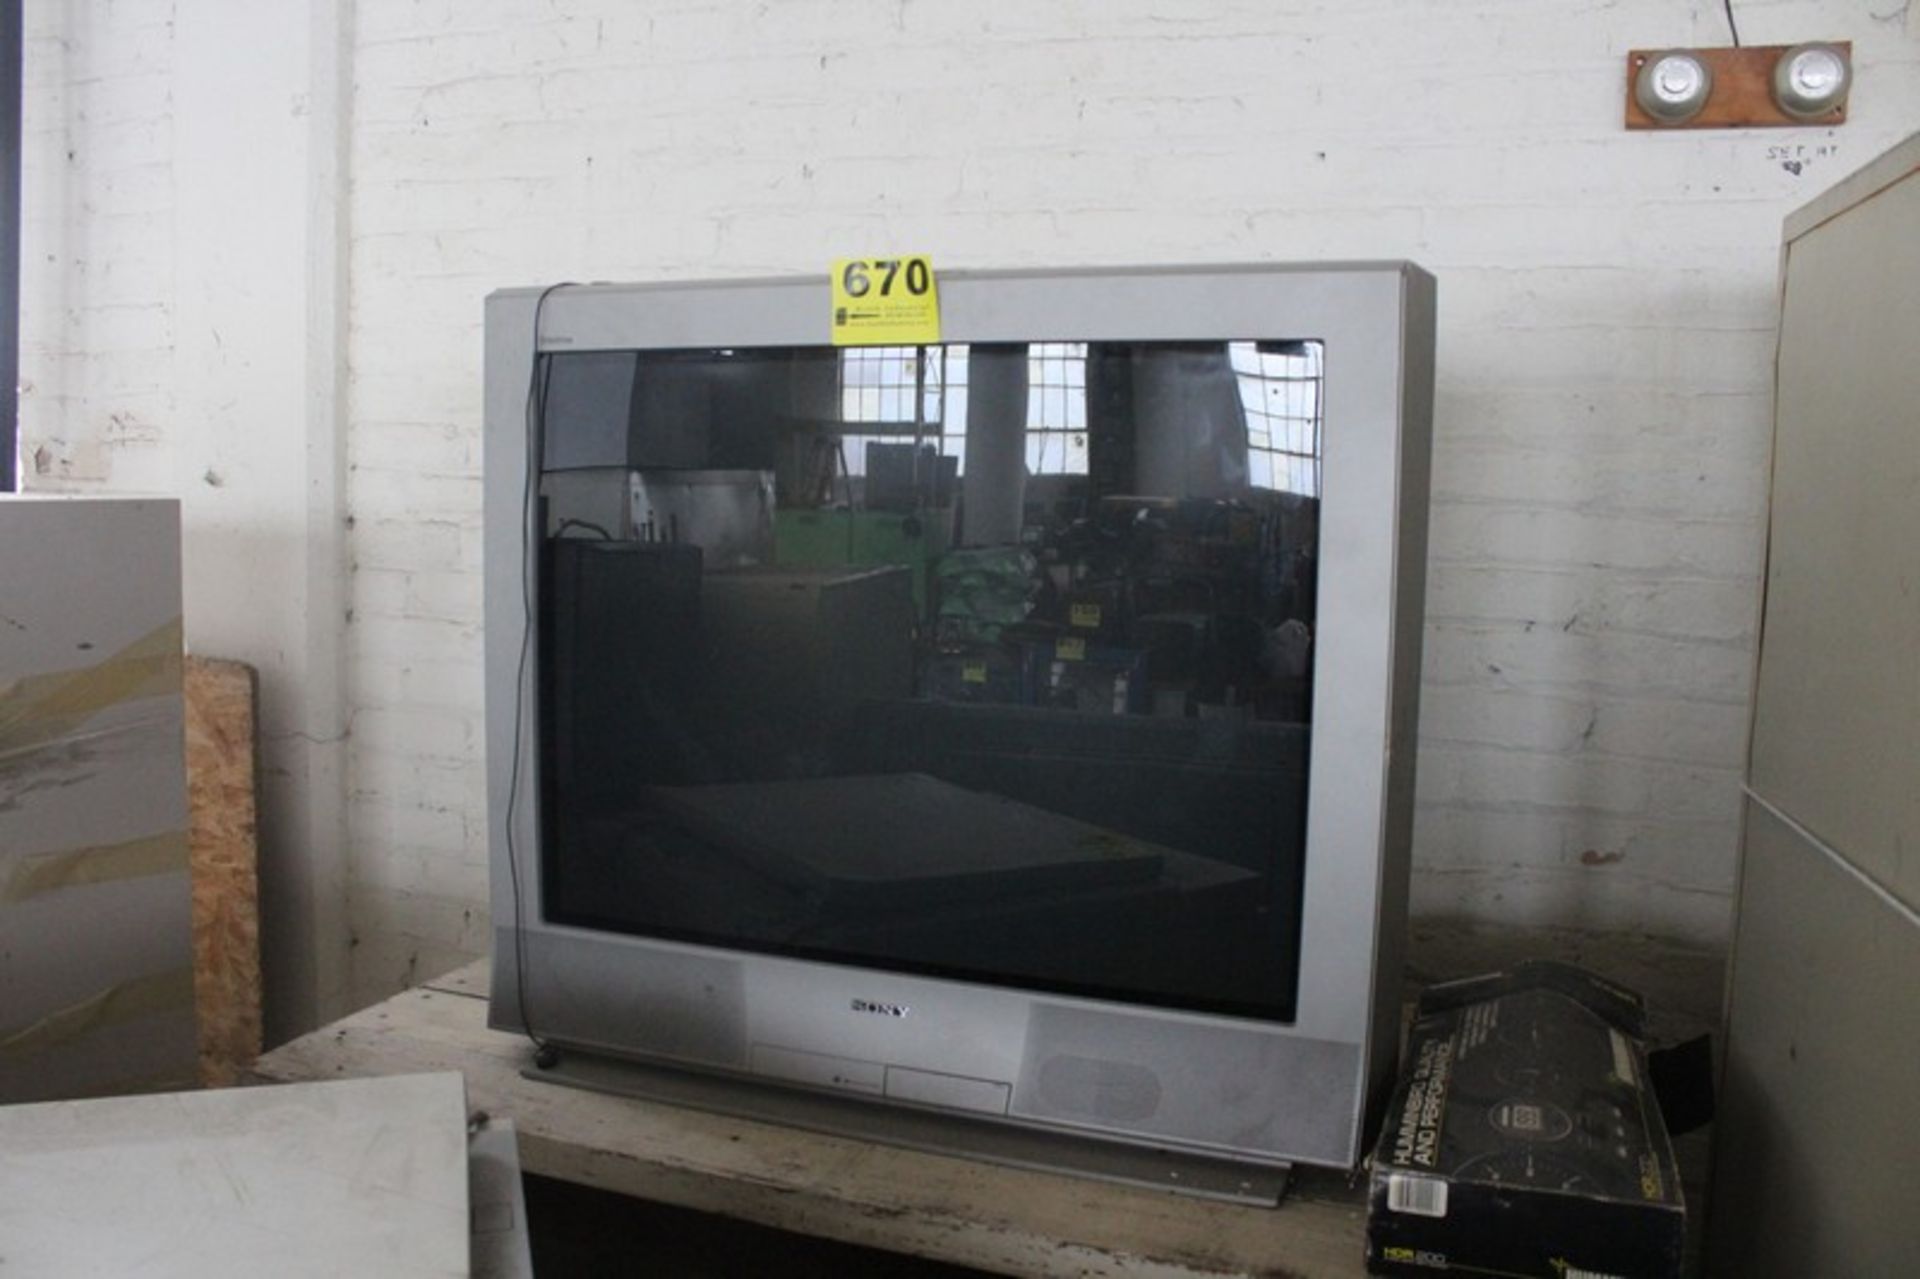 SONY 37" COLOR TELEVISION